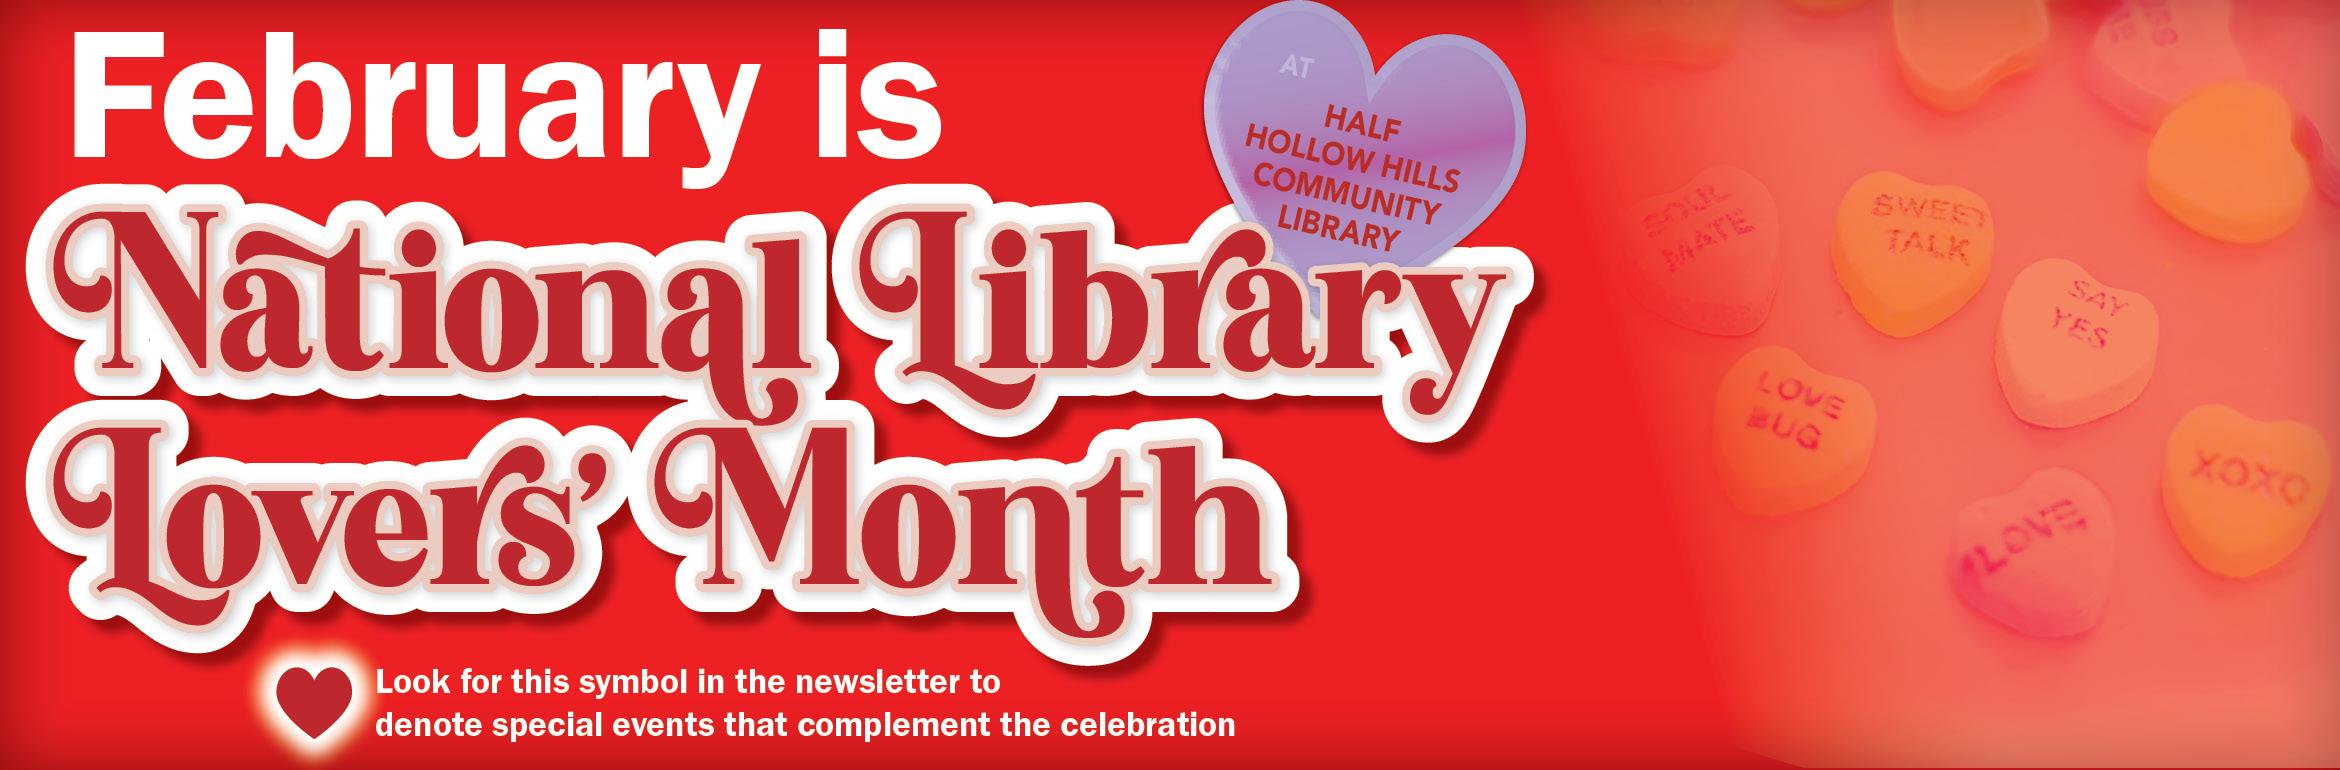 February is National Library Lovers' Month at Half Hollow Hills Community Library. Look for this symbol in the newsletter to denote special events that complement the celebration.